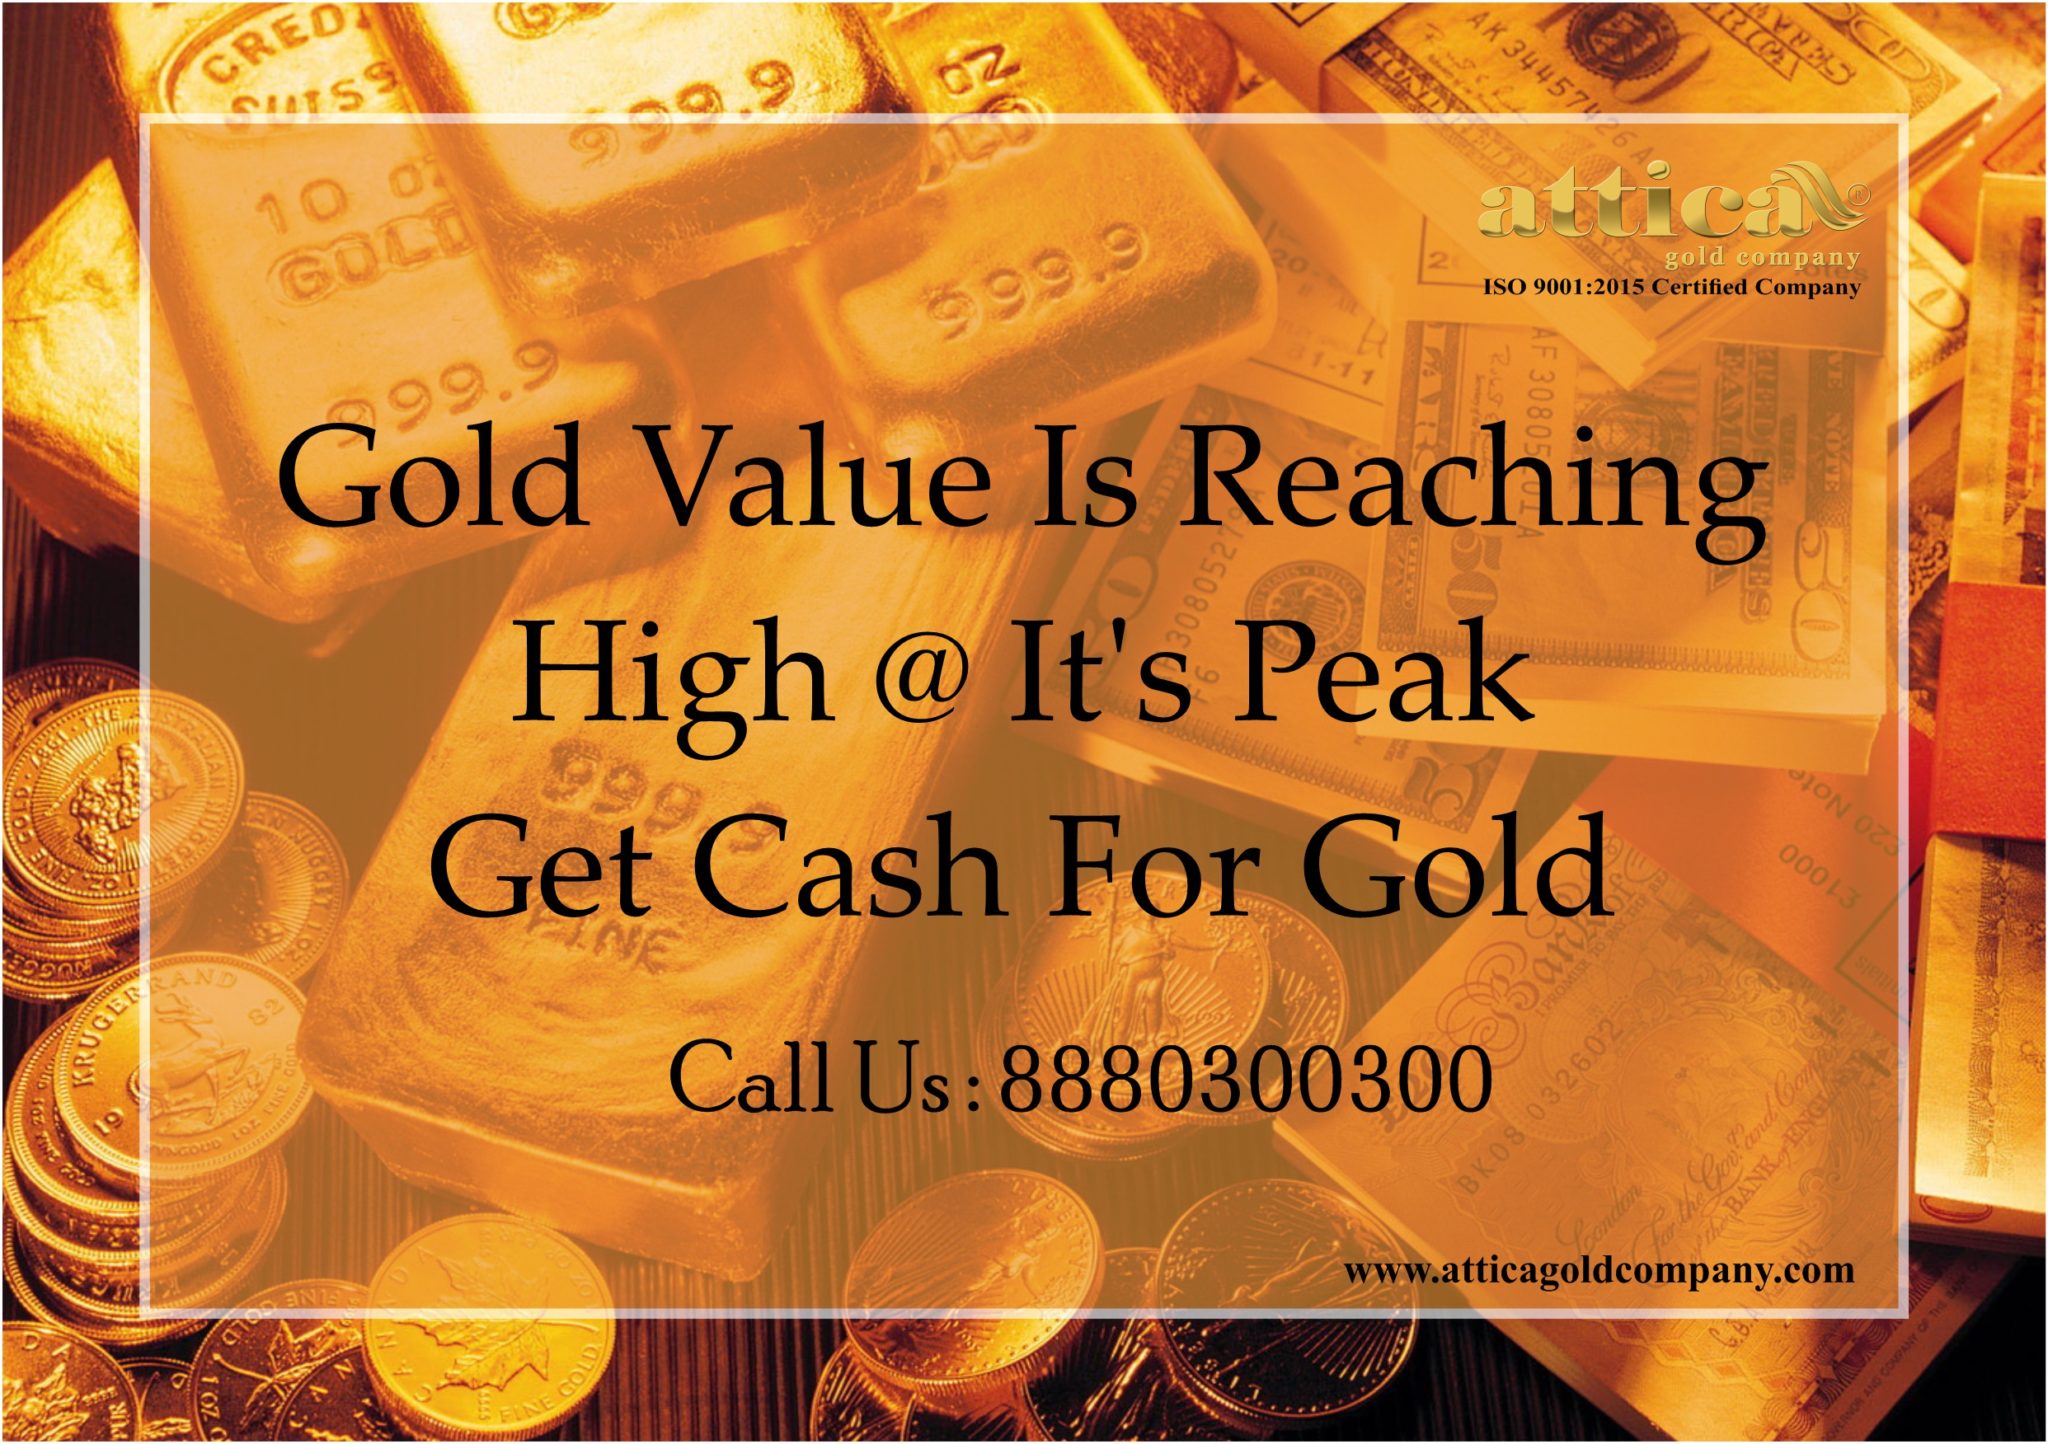 Gold Rate is Reaching High It's Peak Get Cash For Gold Attica Gold